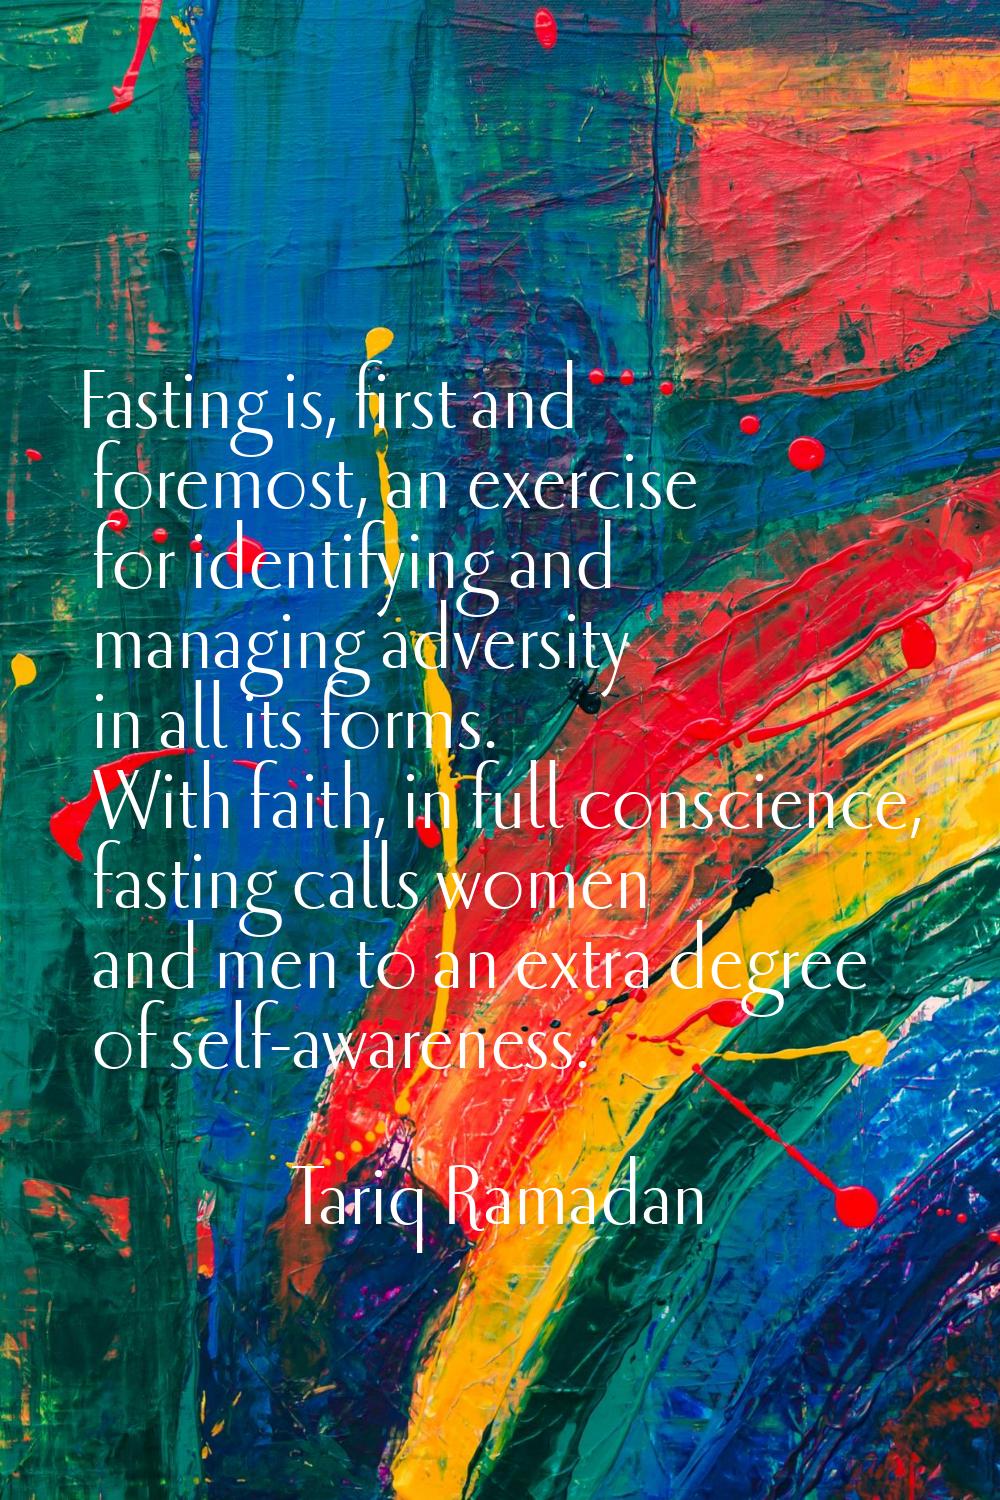 Fasting is, first and foremost, an exercise for identifying and managing adversity in all its forms